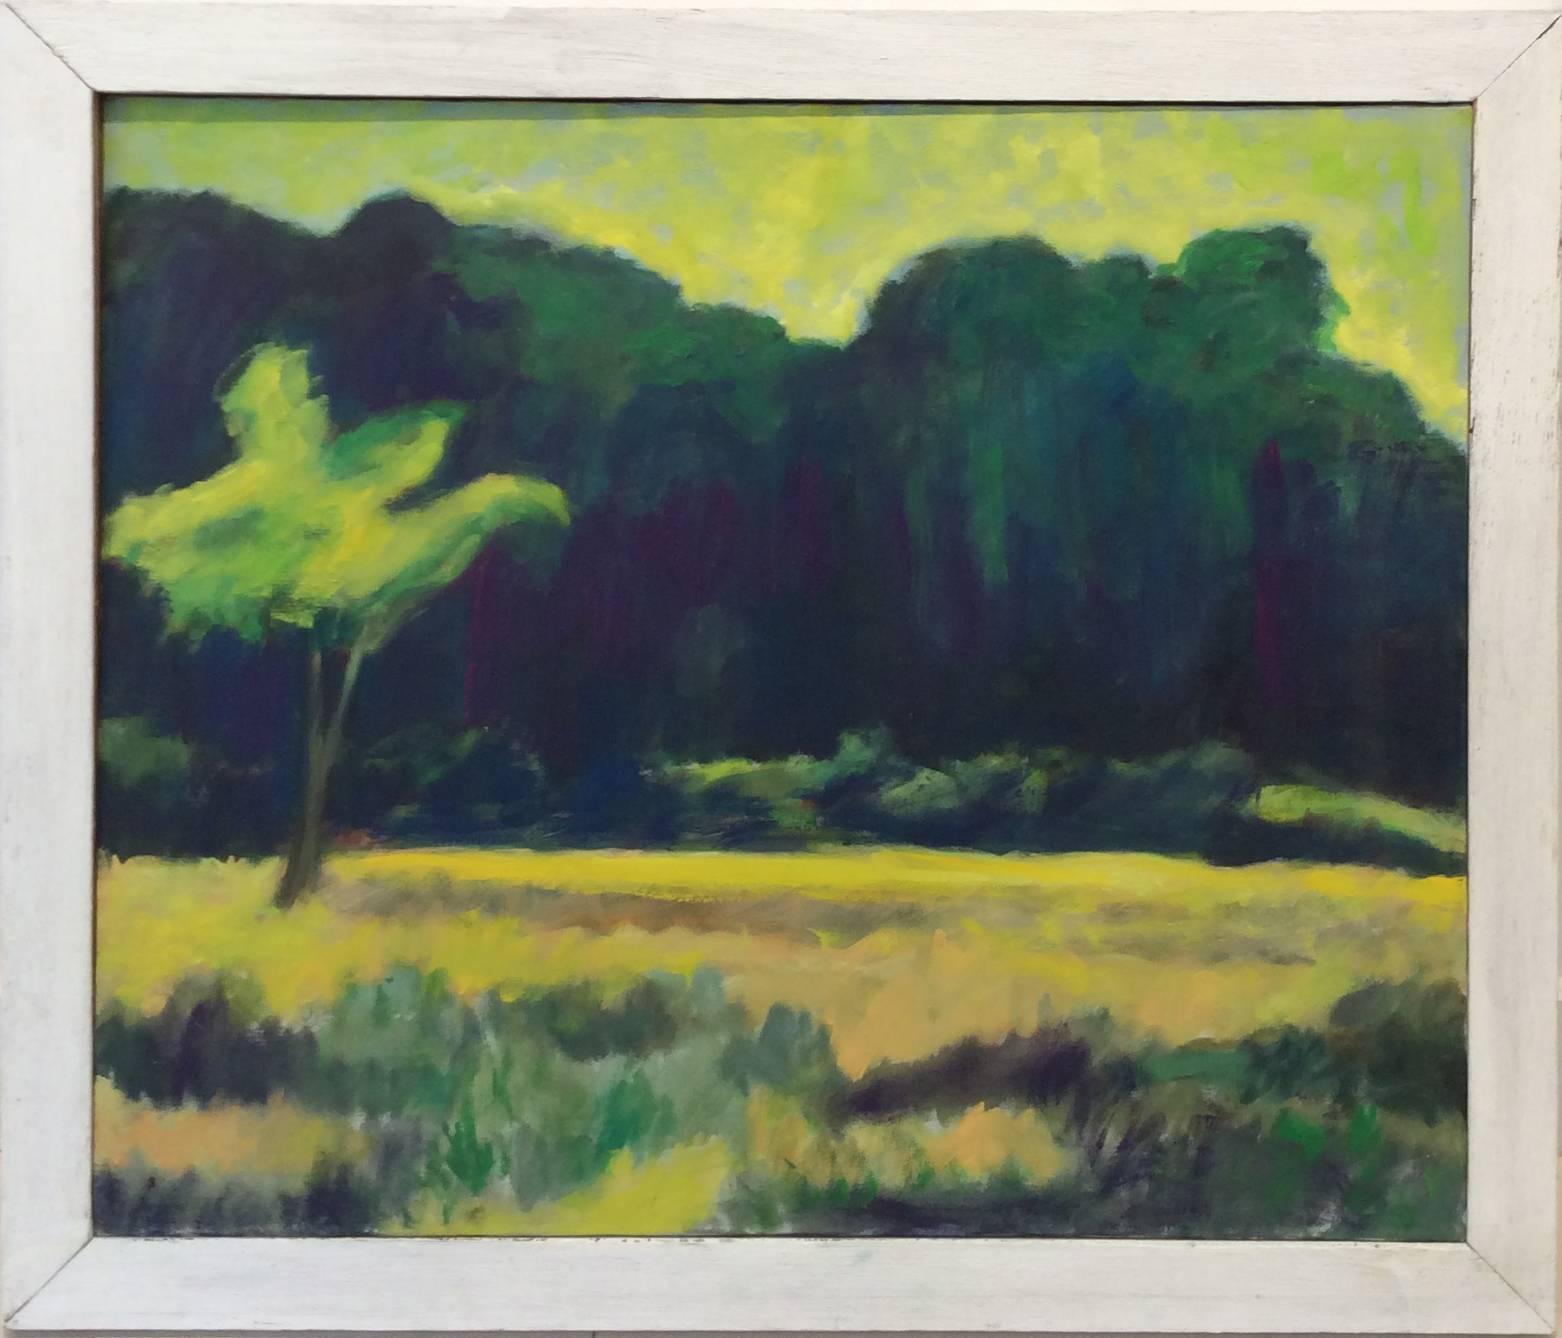 Single Tree (Expressionist Style Landscape of Green Country Field) - Painting by Stephen Brophy